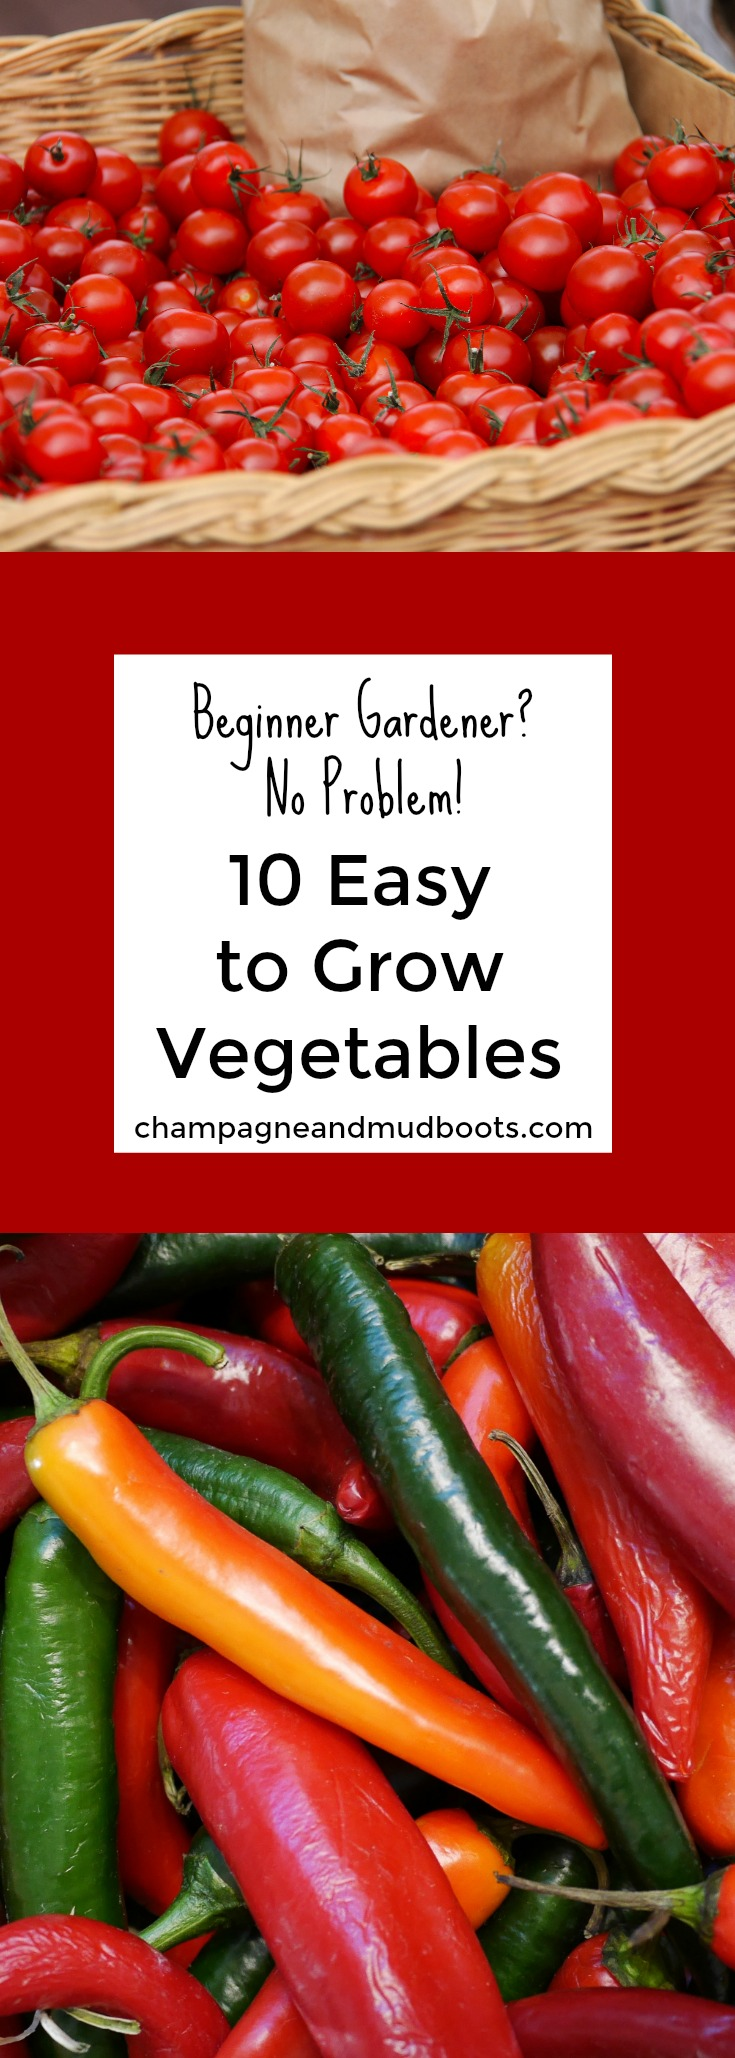 Easy to grow vegetables for the beginning gardener that will help even the inexperienced have a successful and productive garden.